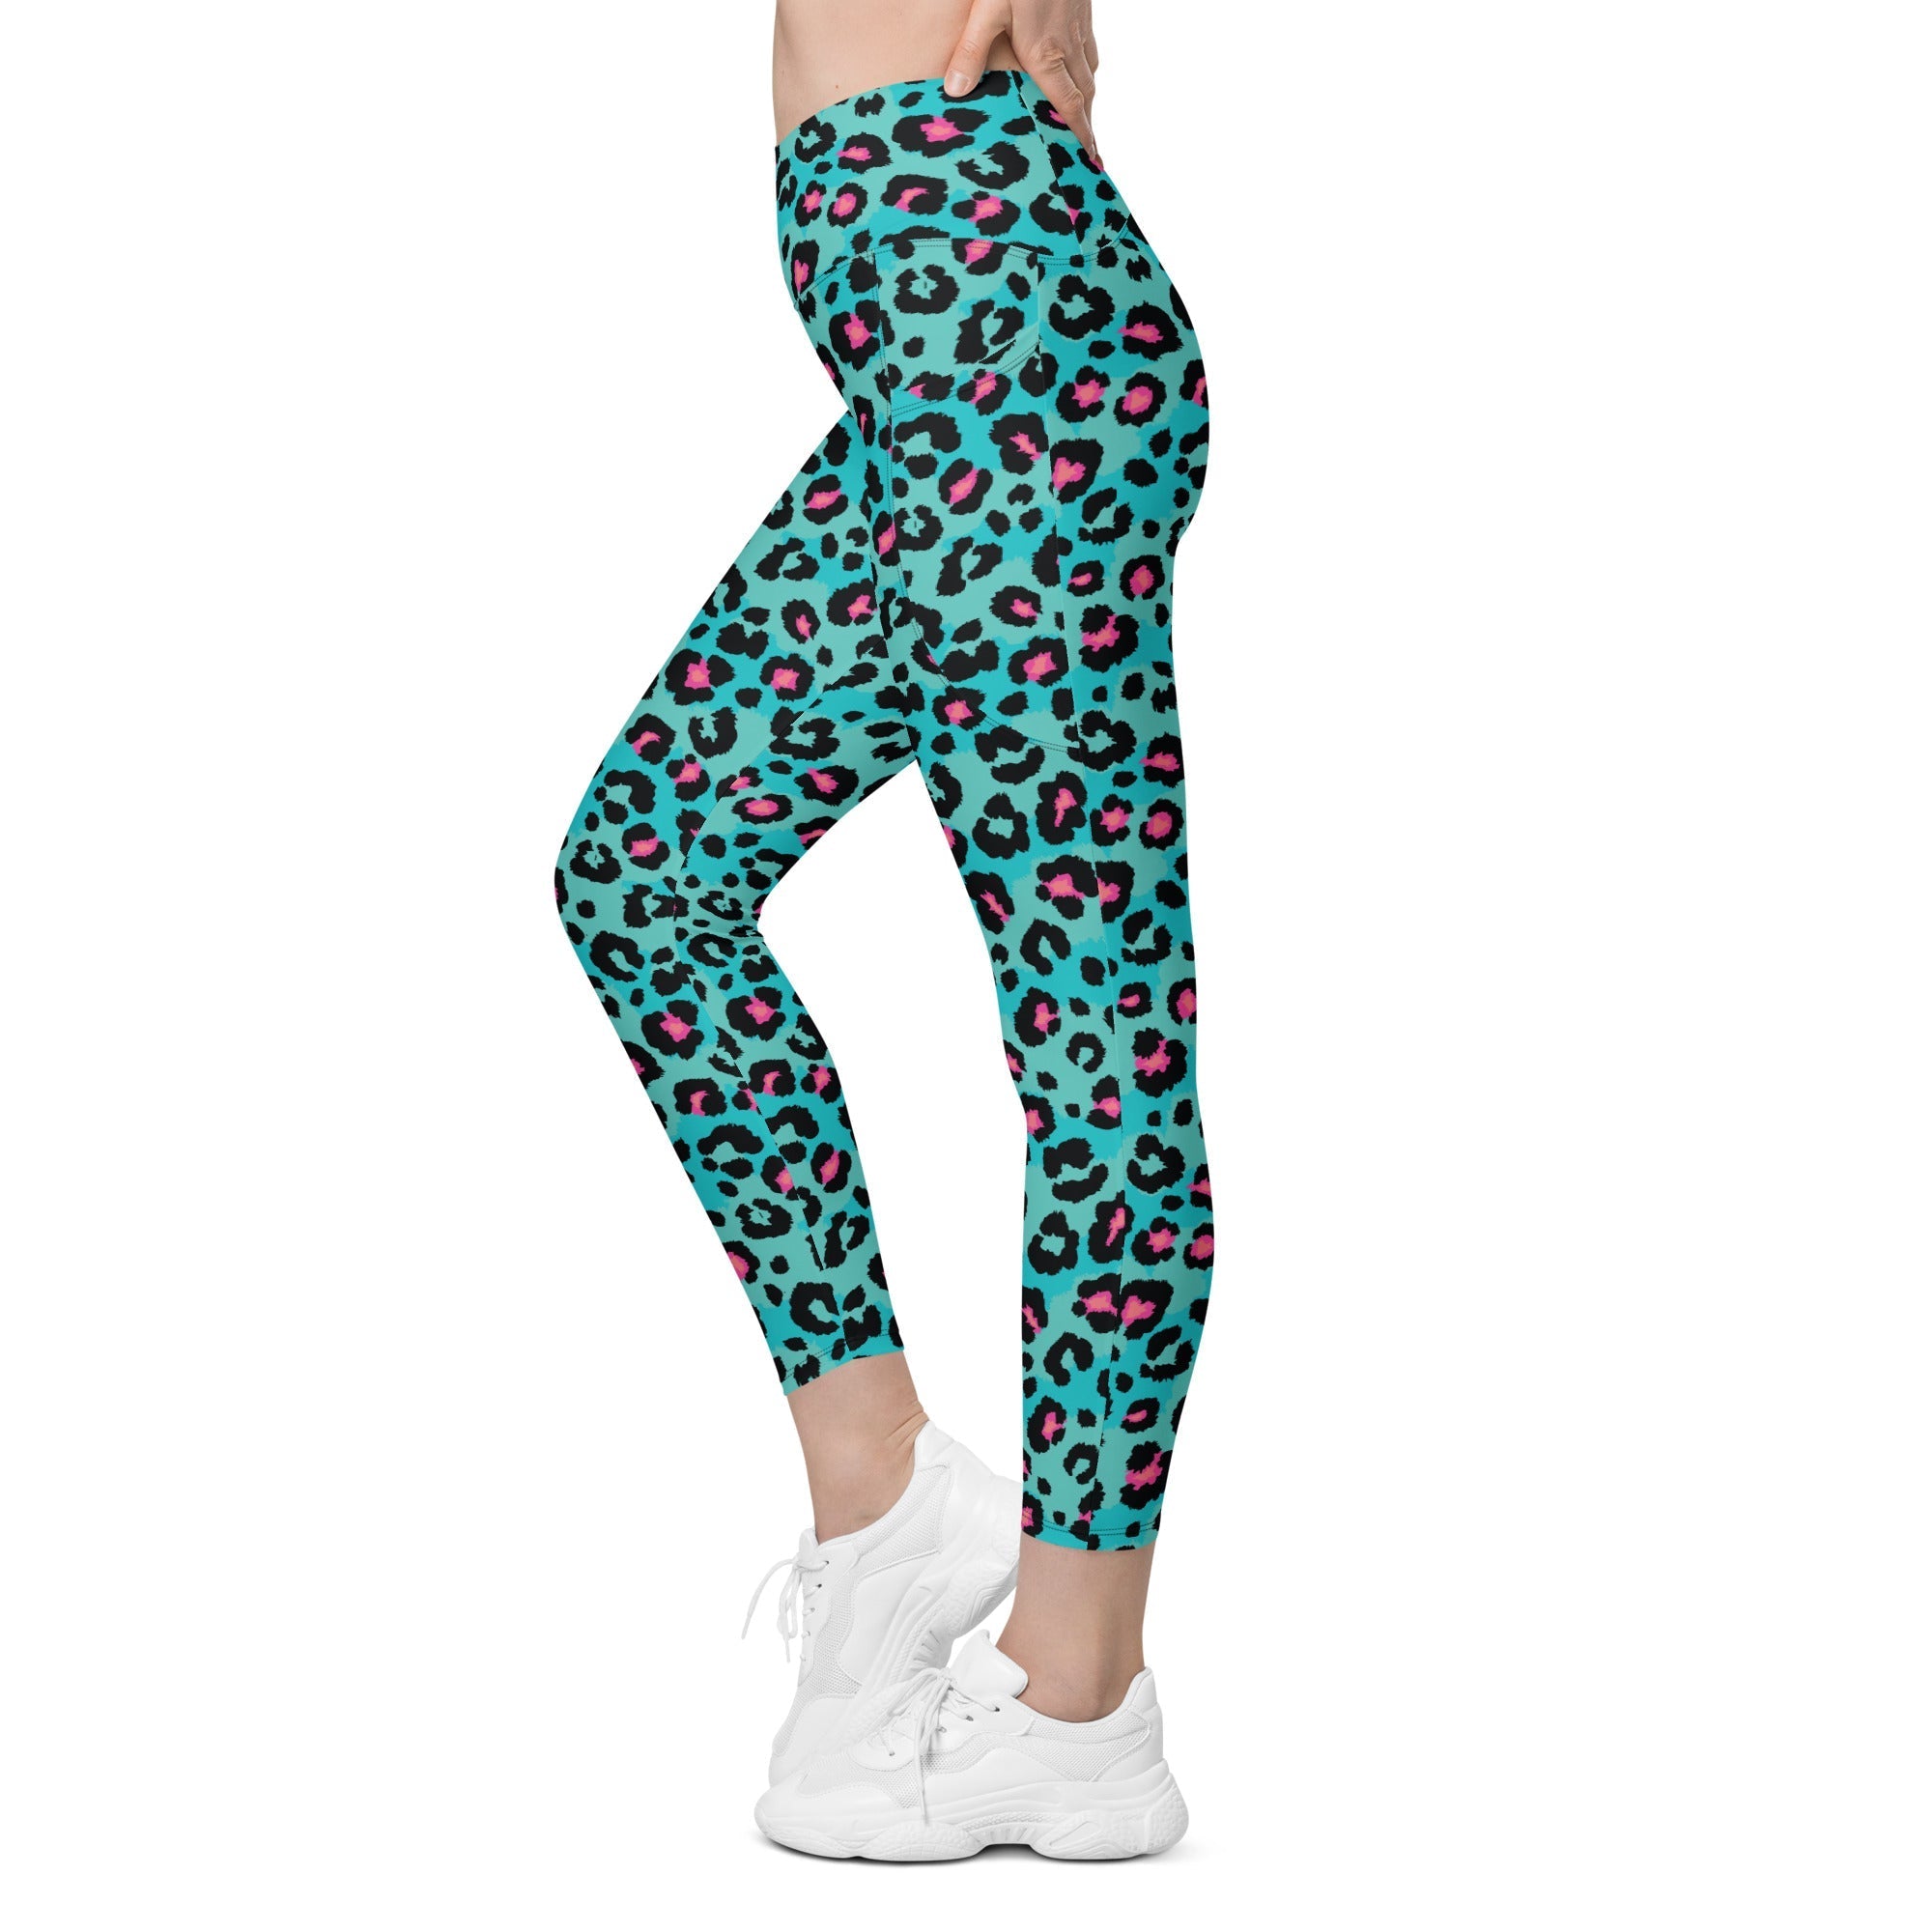 Turquoise Leopard Print Crossover Leggings With Pockets